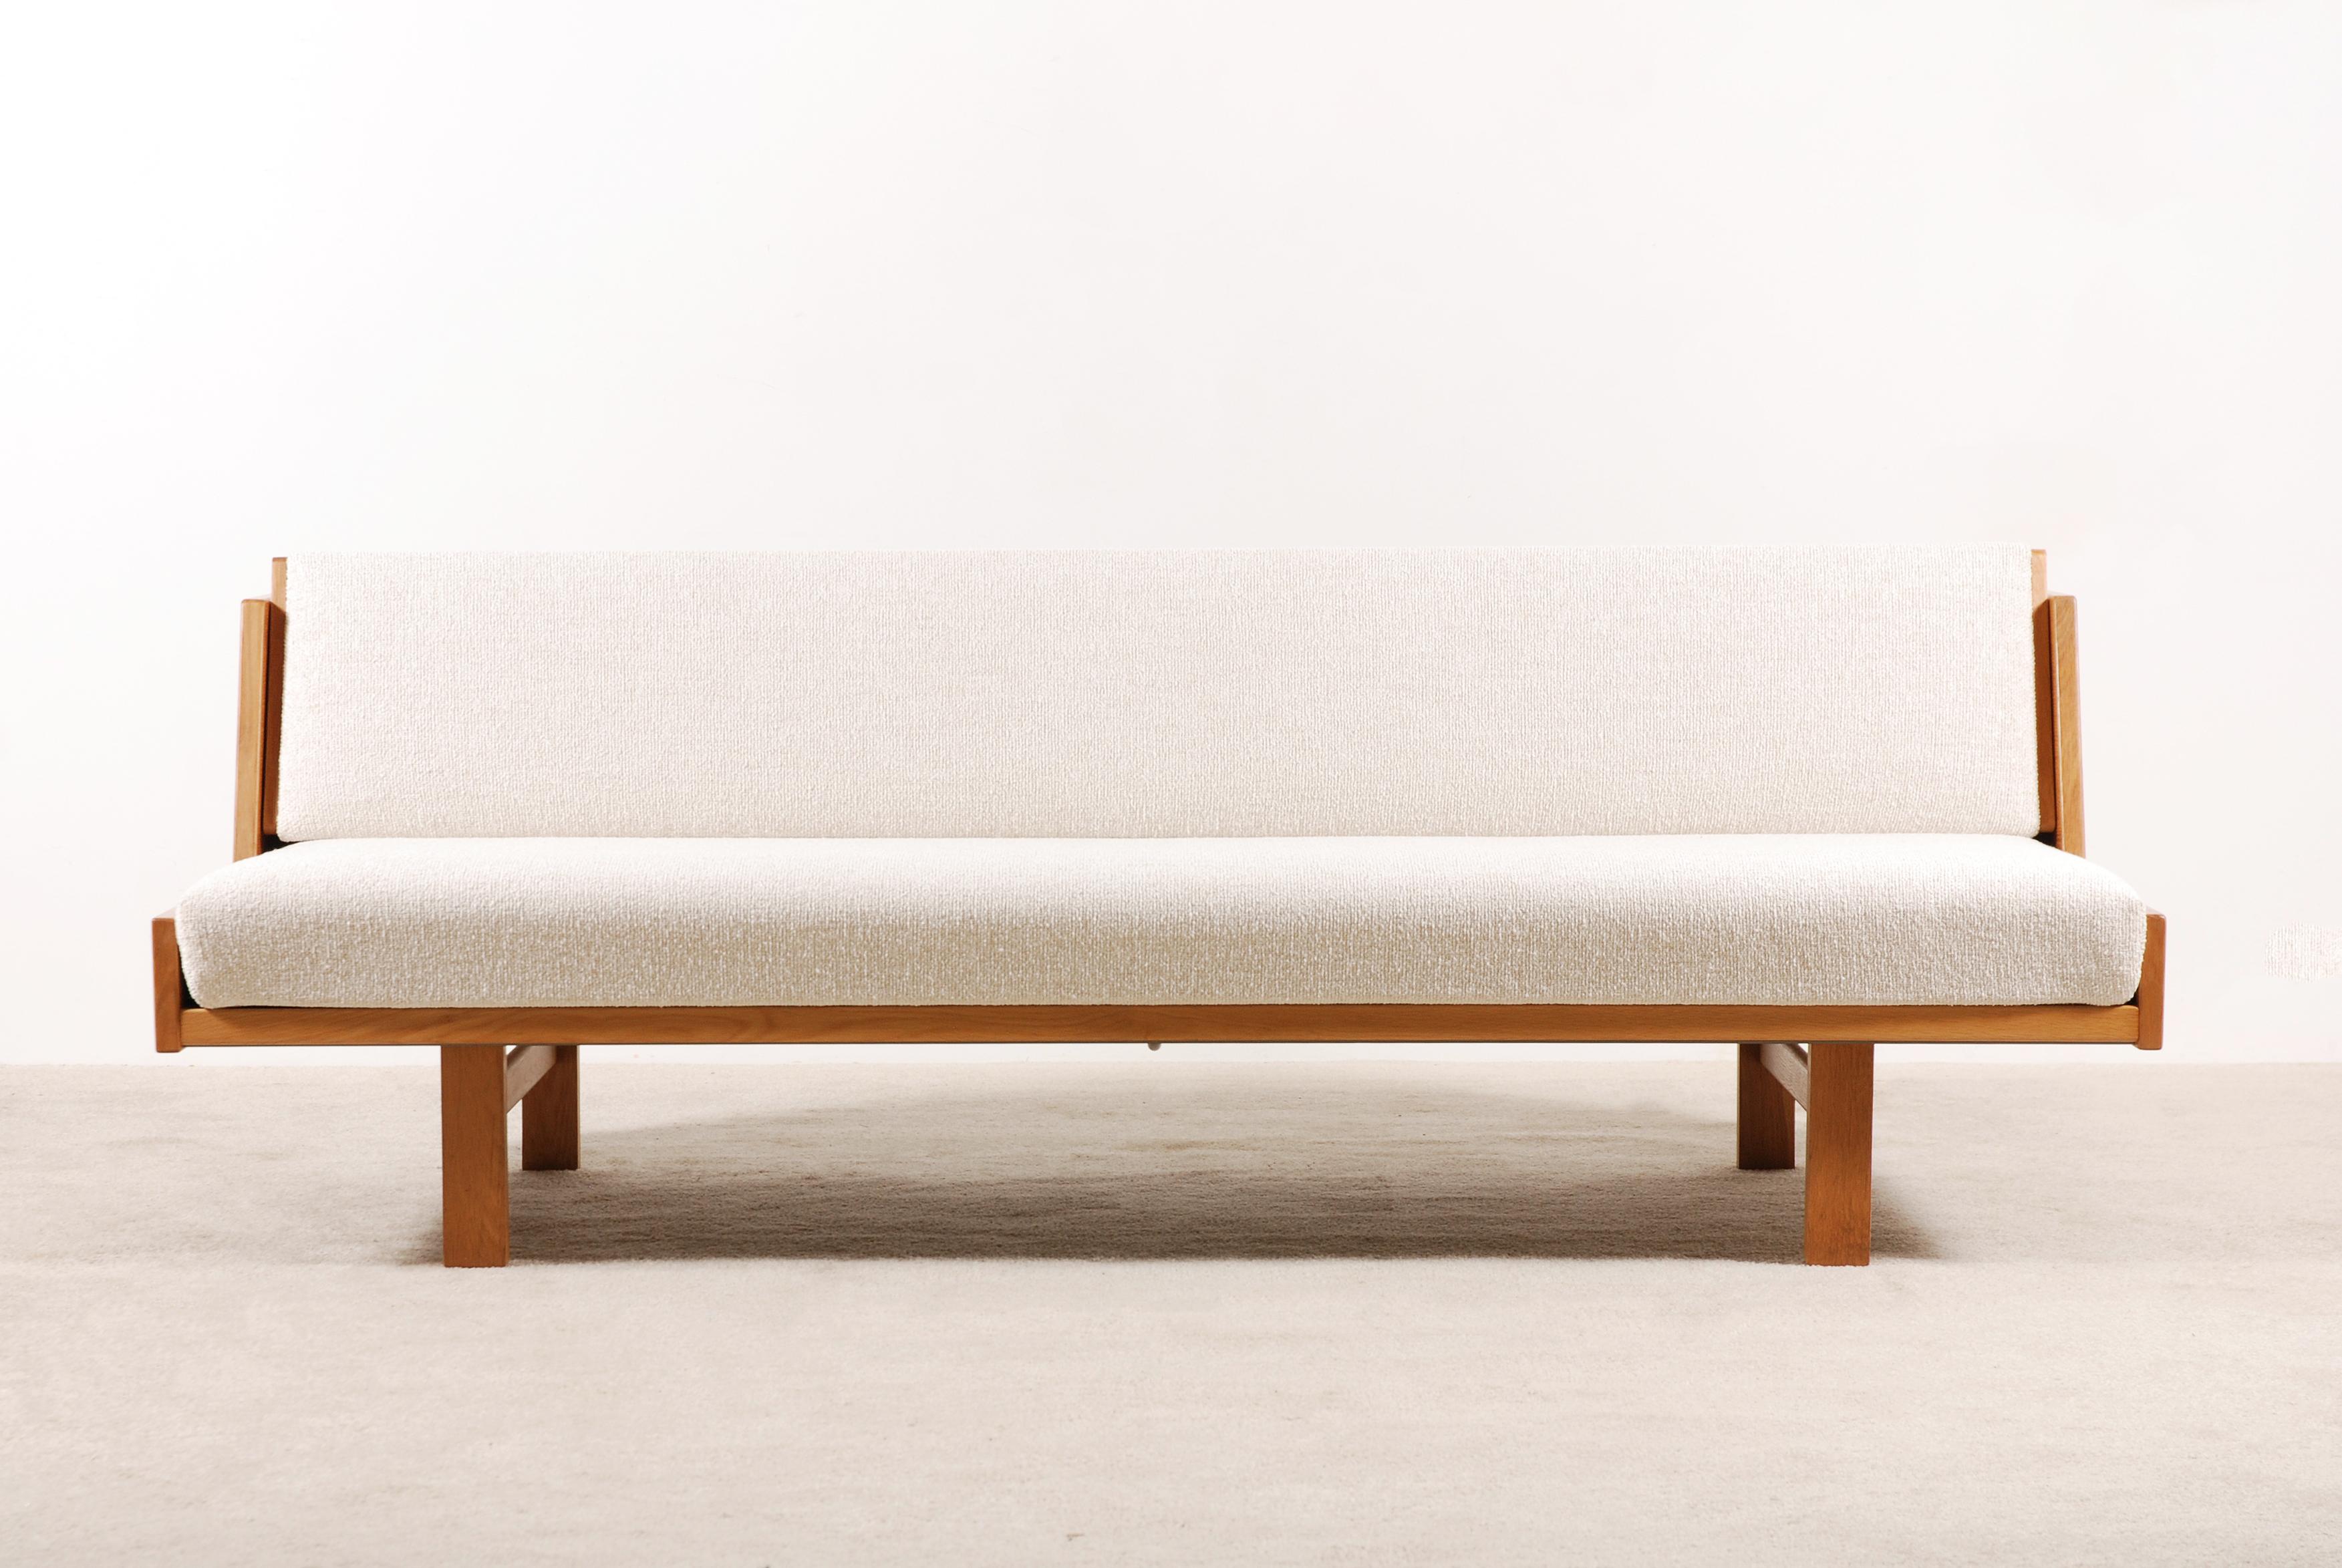 Danish Daybed model GE-258 in oak and bouclé fabric designed by Hans J. Wegner in 1954 and produced by Getama.
Original Piece from the 1960s Newly Upholstered.
This sofa has been fully re-upholstered and refurbished.
Excellent condition.